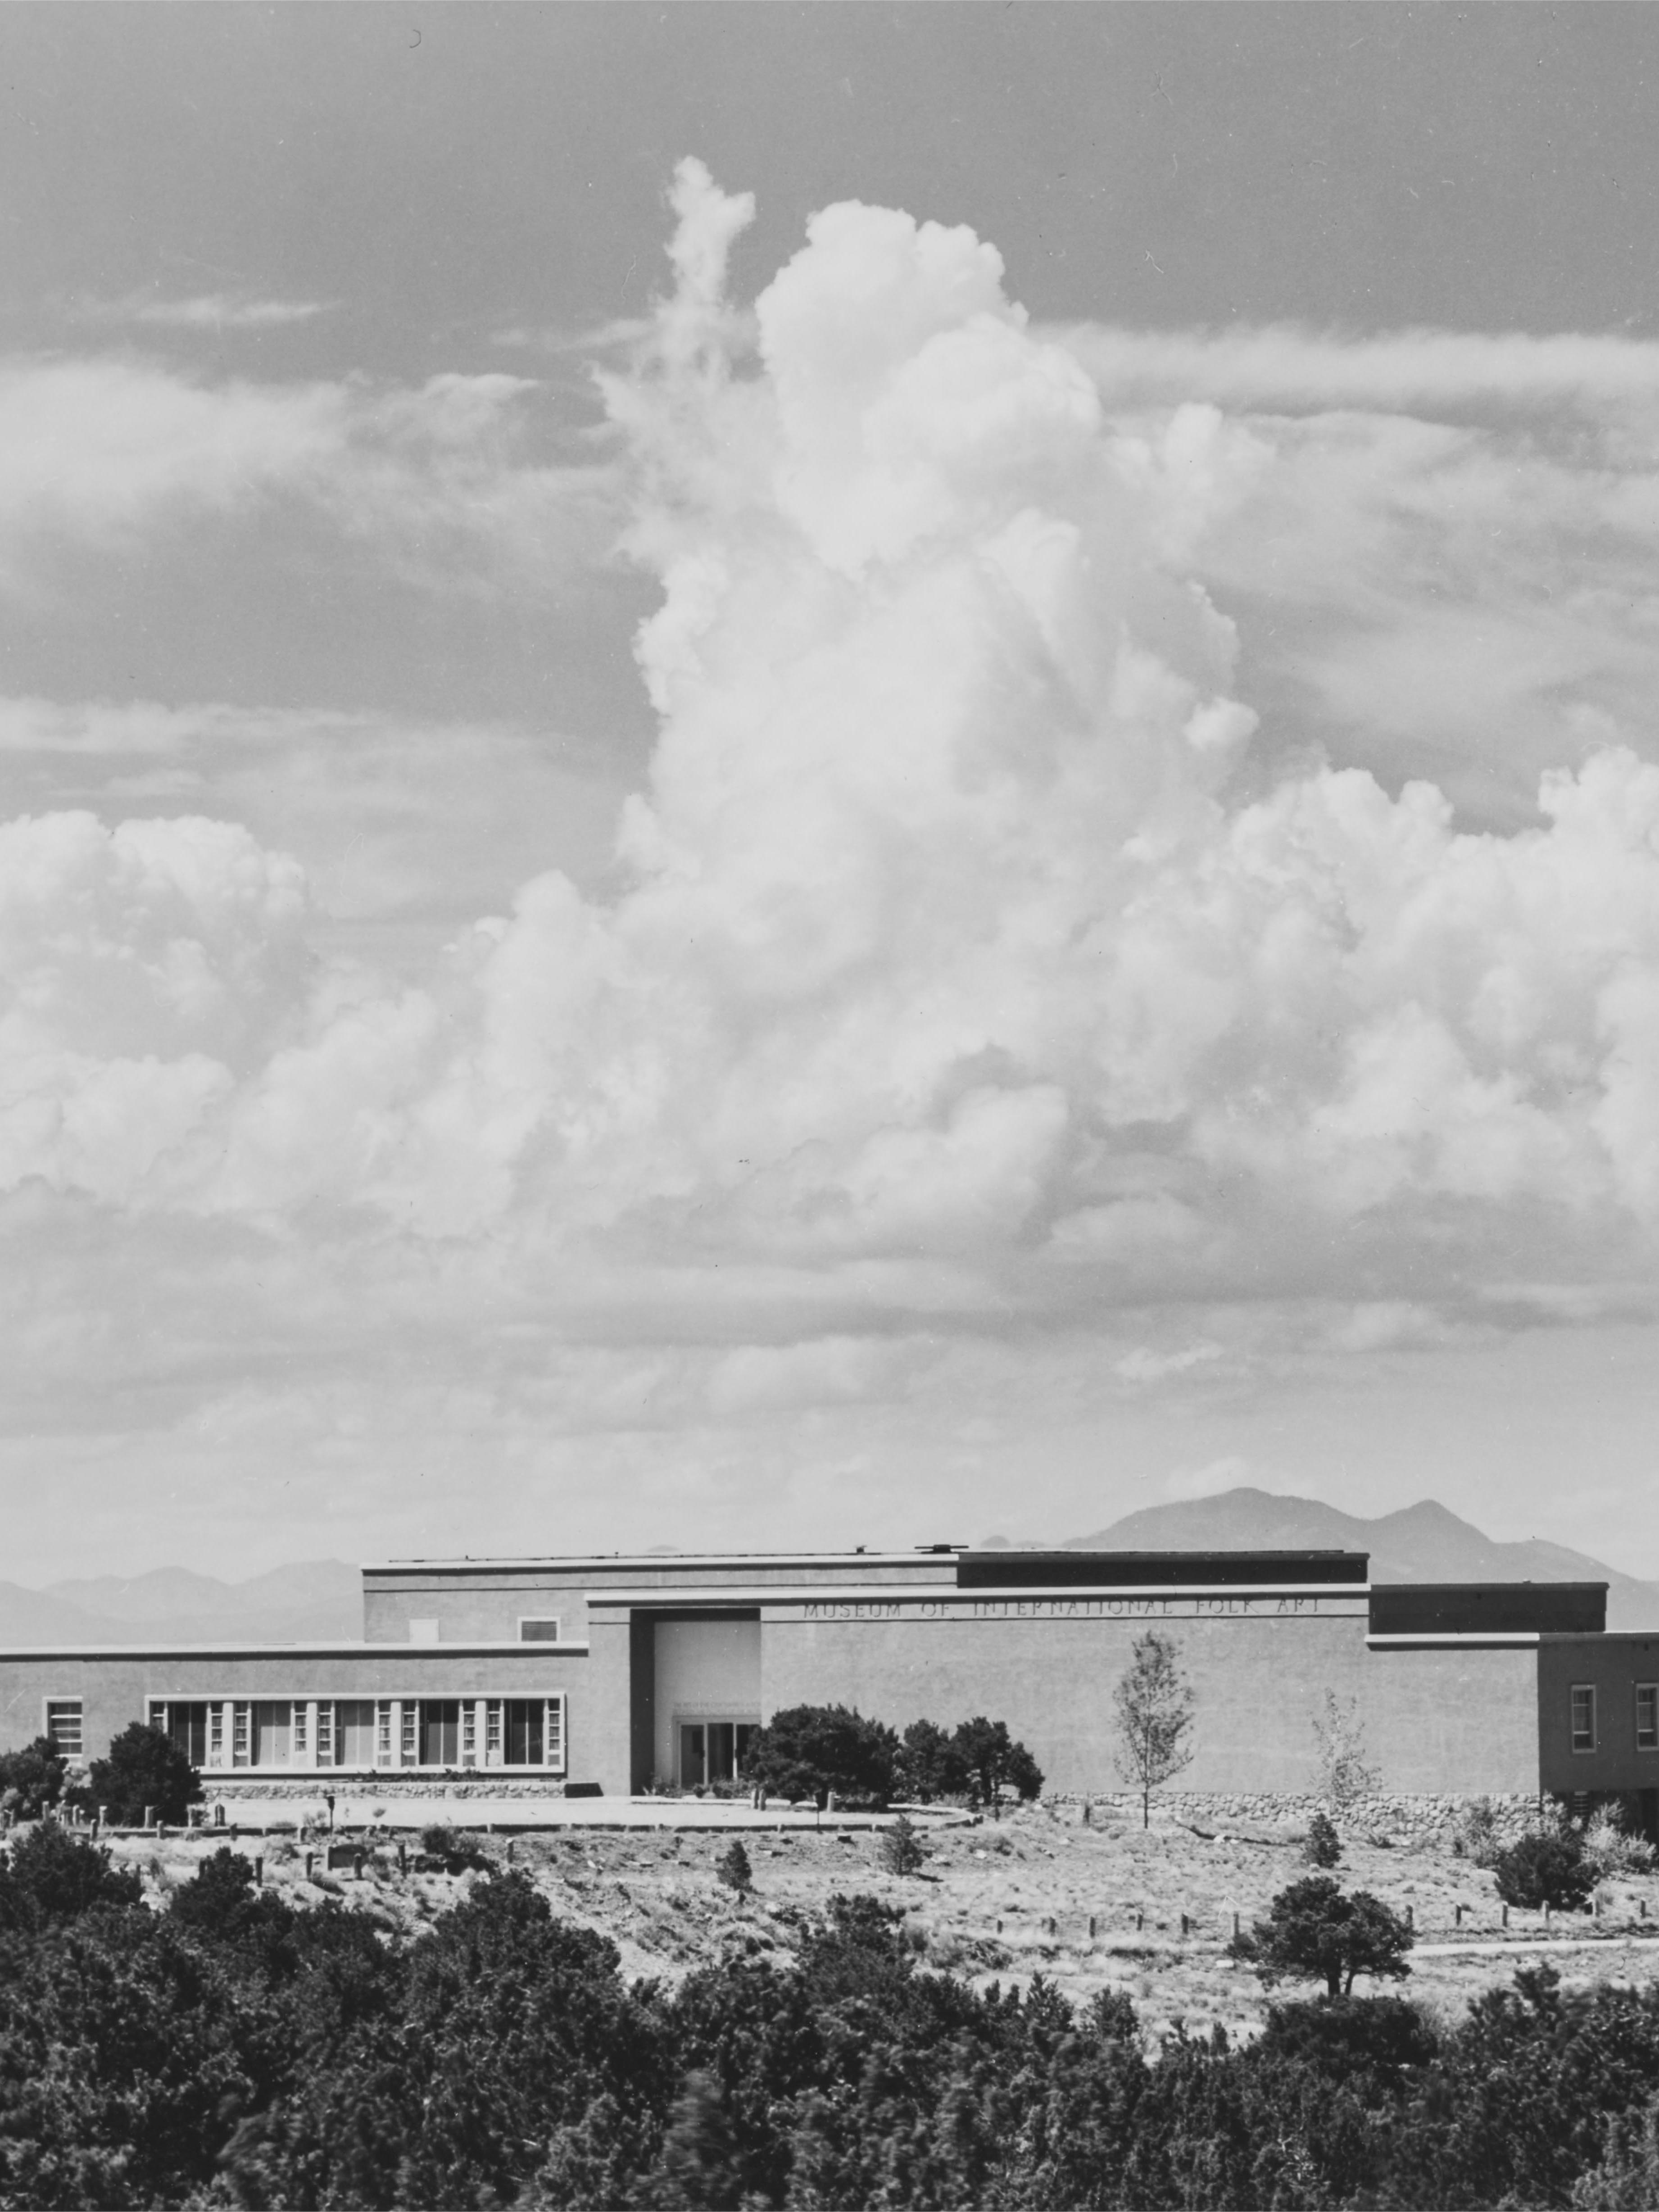 Cropped version of Blair Clark's digital re-photographed image of a Laura Gilpin print of the Museum shortly before opening day in 1953 - We had to crop this to make it fit in the blog space, but the original appears in the main story.